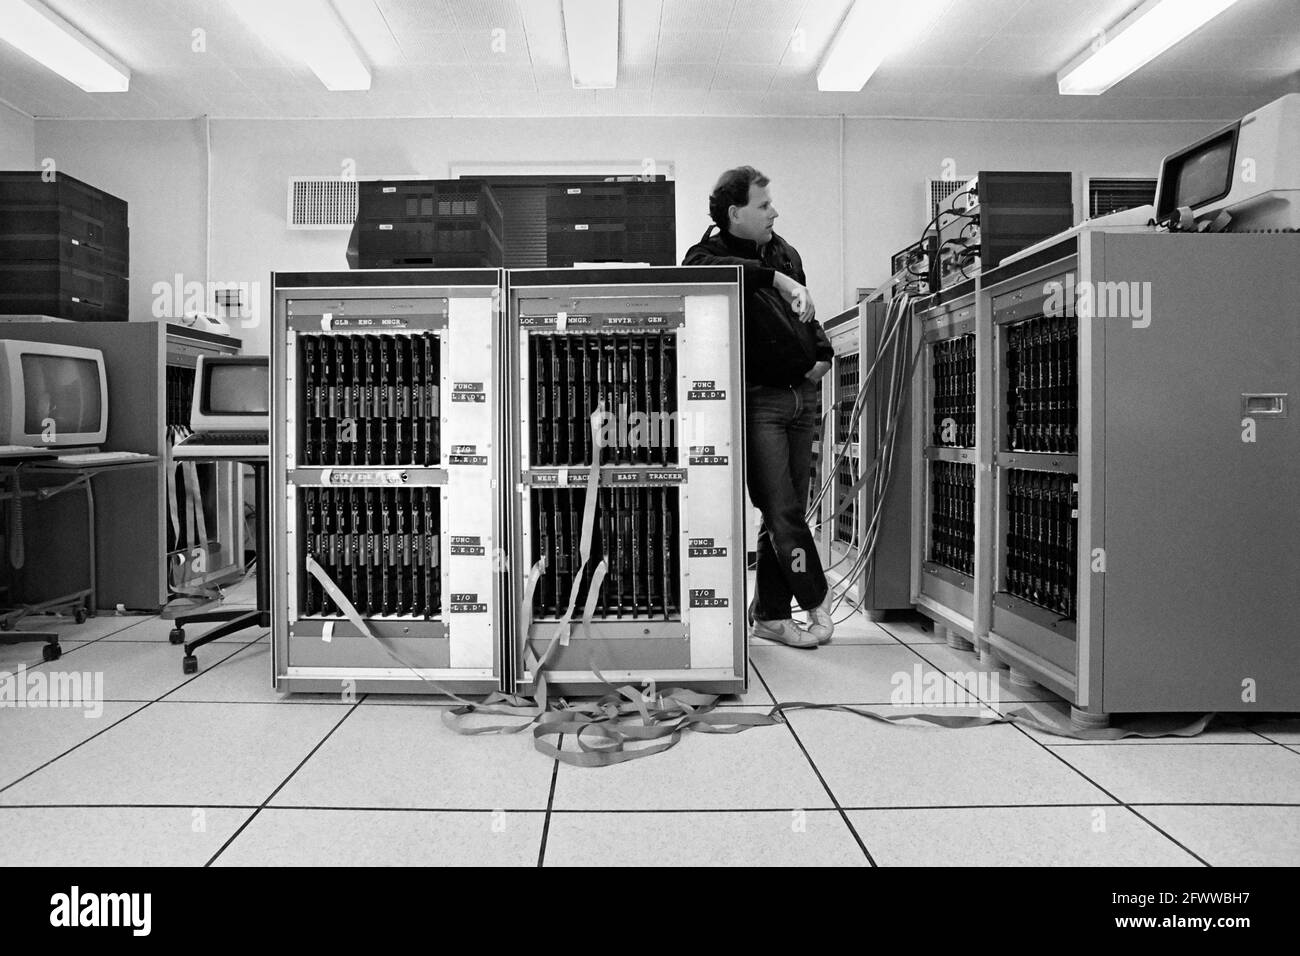 A JPL/Caltech project team leader conducts a 'Smoke Test'; monitoring the Mark III Hypercube supercomputer's functions as the size is ramped up. Each board comprises a node in the parallel-computing whole. The Mark III Hypercube integrated 128 nodes; each node having the power of 25 VAX minicomputers.? The peak speed was 2 billion floating point operations per second.? It was built with Motorola 68020 microprocessors and was a joint endeavor of Caltech and JPL.? Stock Photo